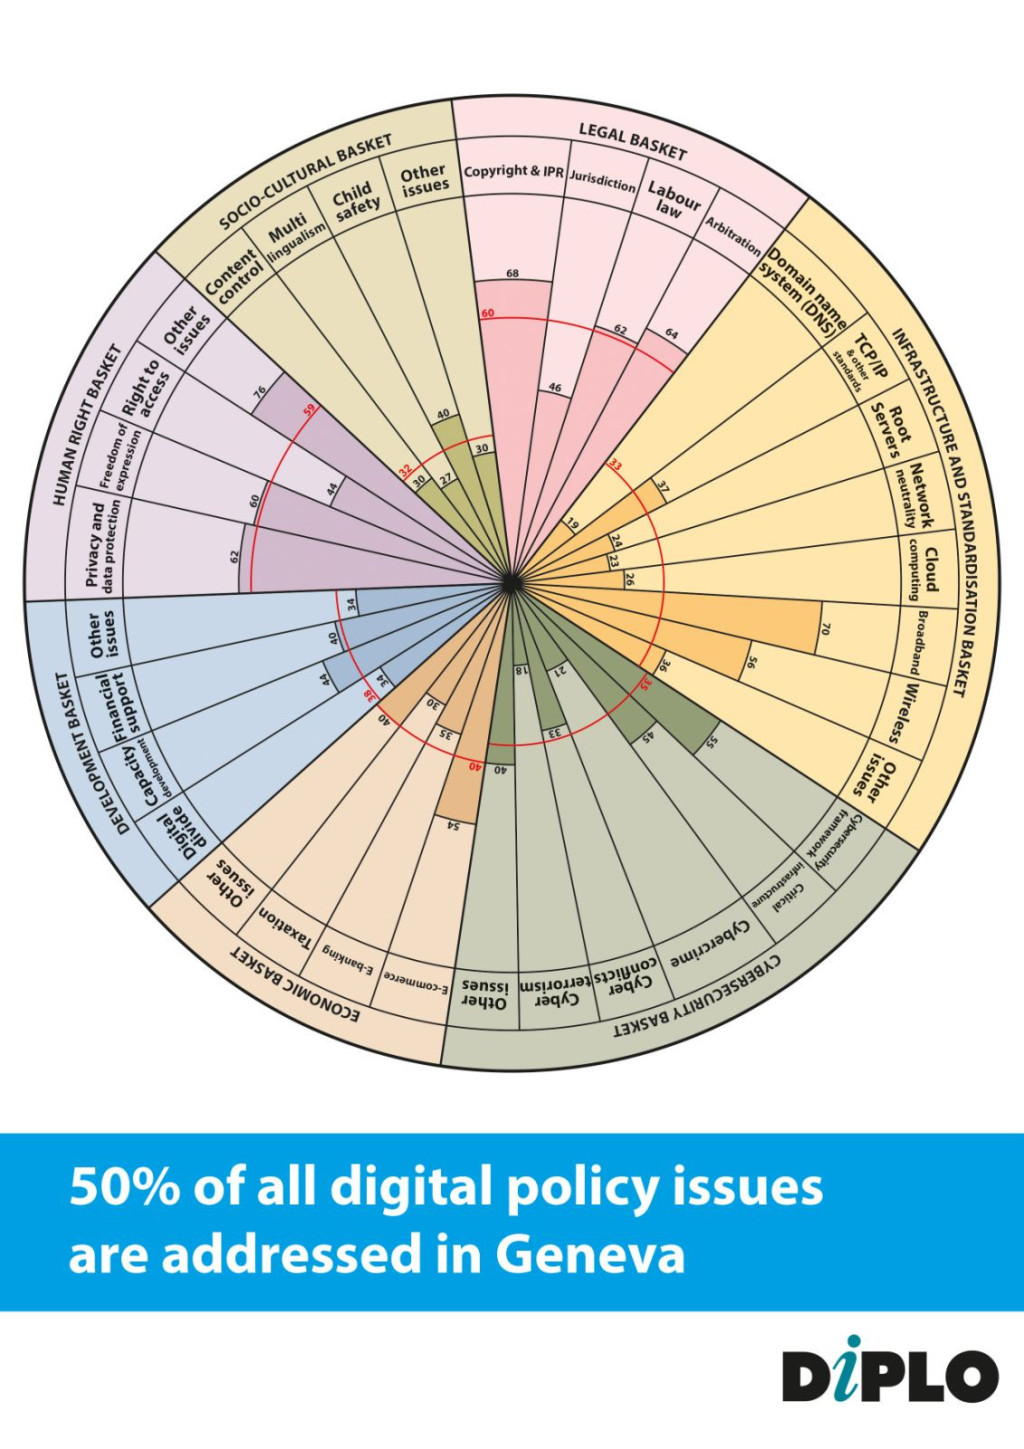 A pie chart depicting areas of digital policy issues addressed in Geneva - human rights, legal, infrastructure, sociocultural, economic. 50% of all digital policy issues are addressed in Geneva. 